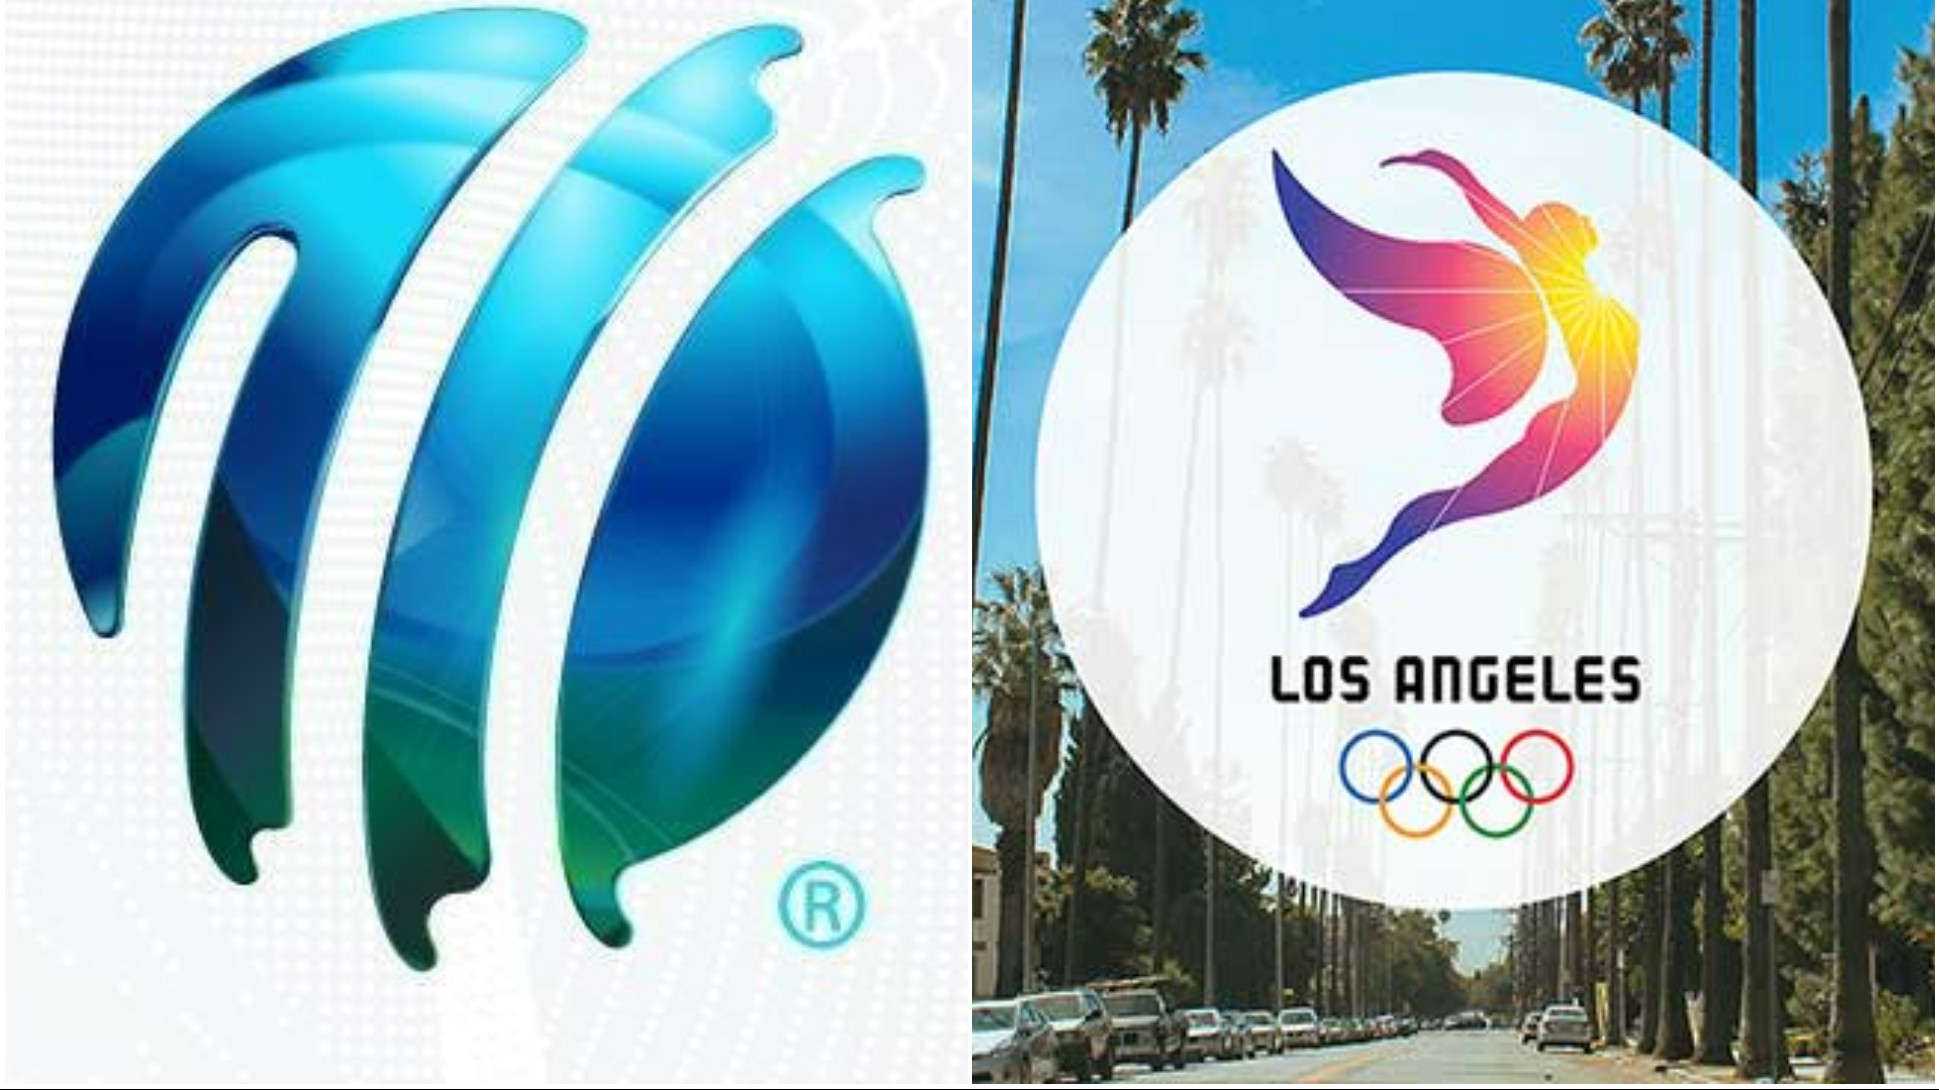 ICC optimistic about cricket's inclusion in Los Angeles Olympics 2028 - Report